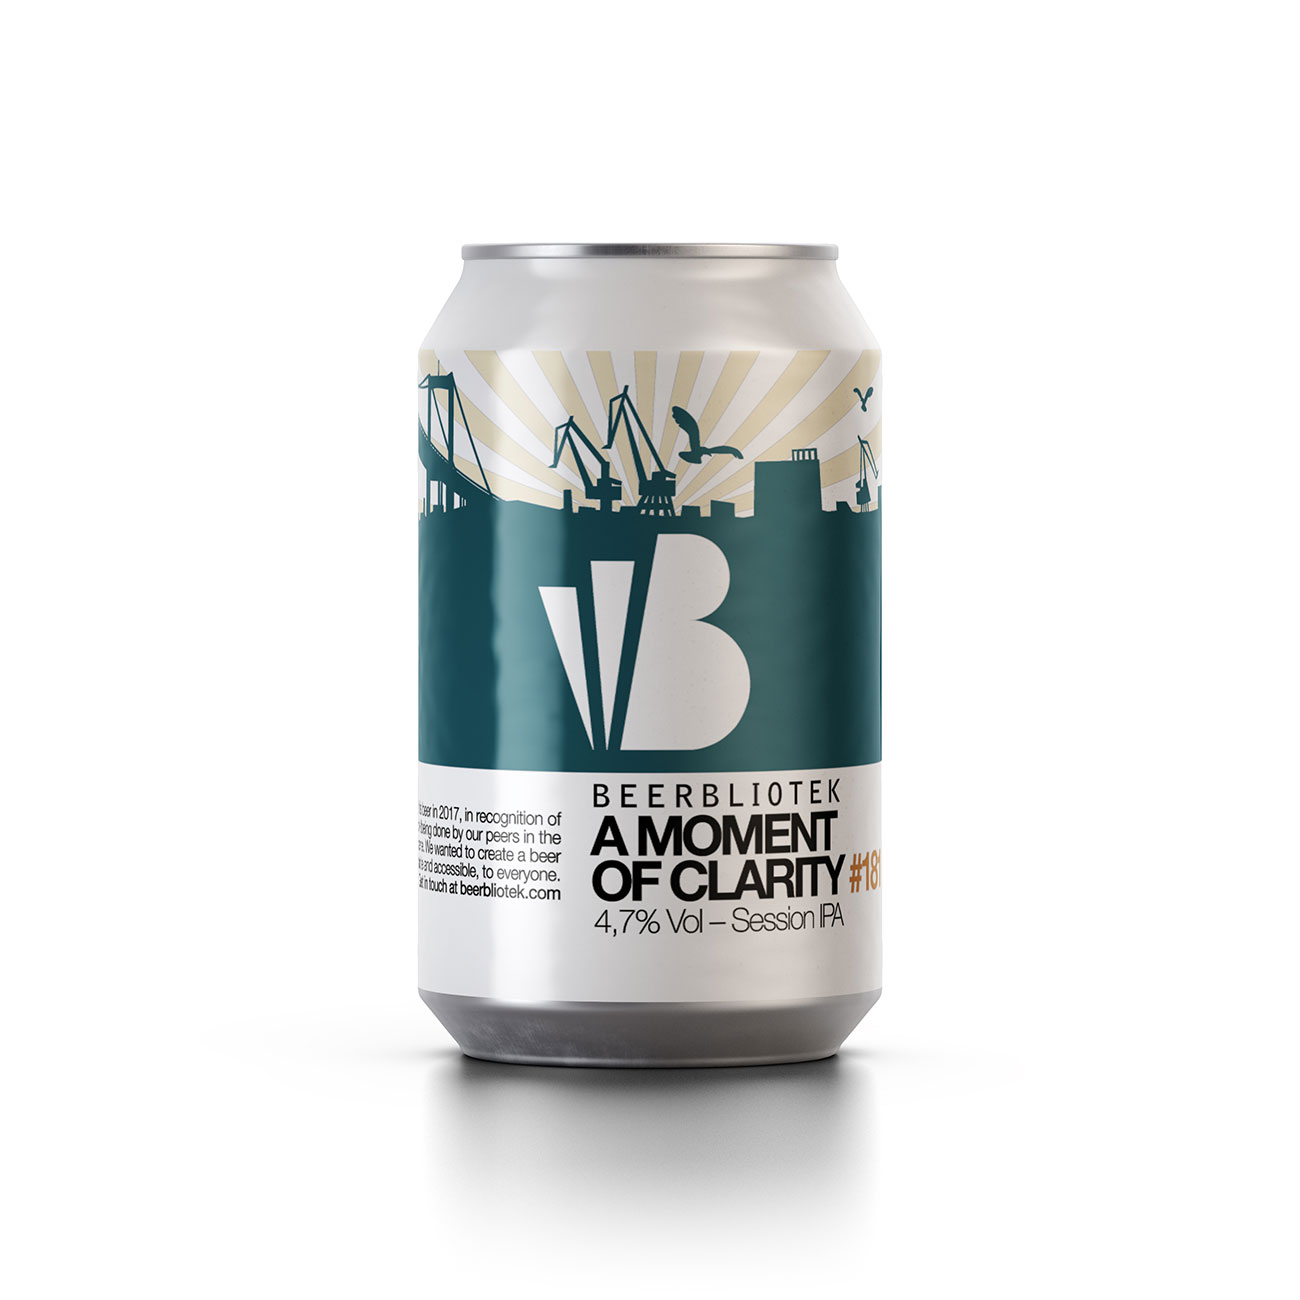 A can packshot of A Moment of Clarity, the Session IPA brewed by Beerbliotek Craft Brewery in Sweden.